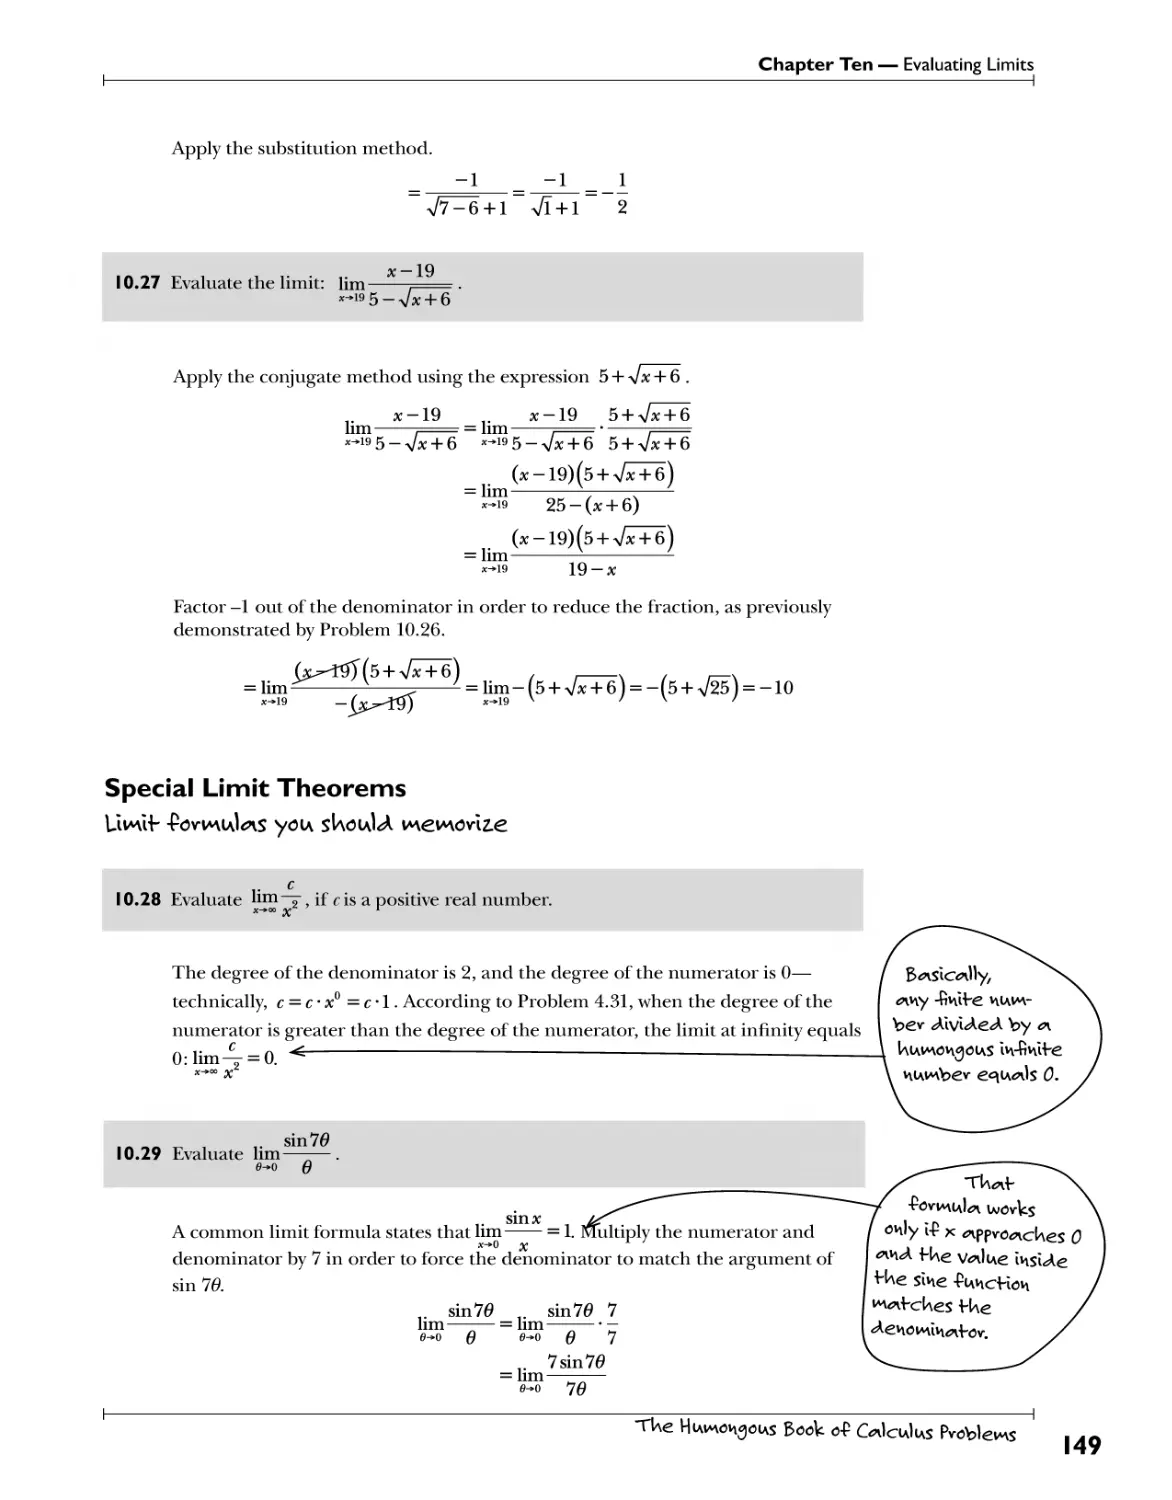 Special Limit Theorems 149